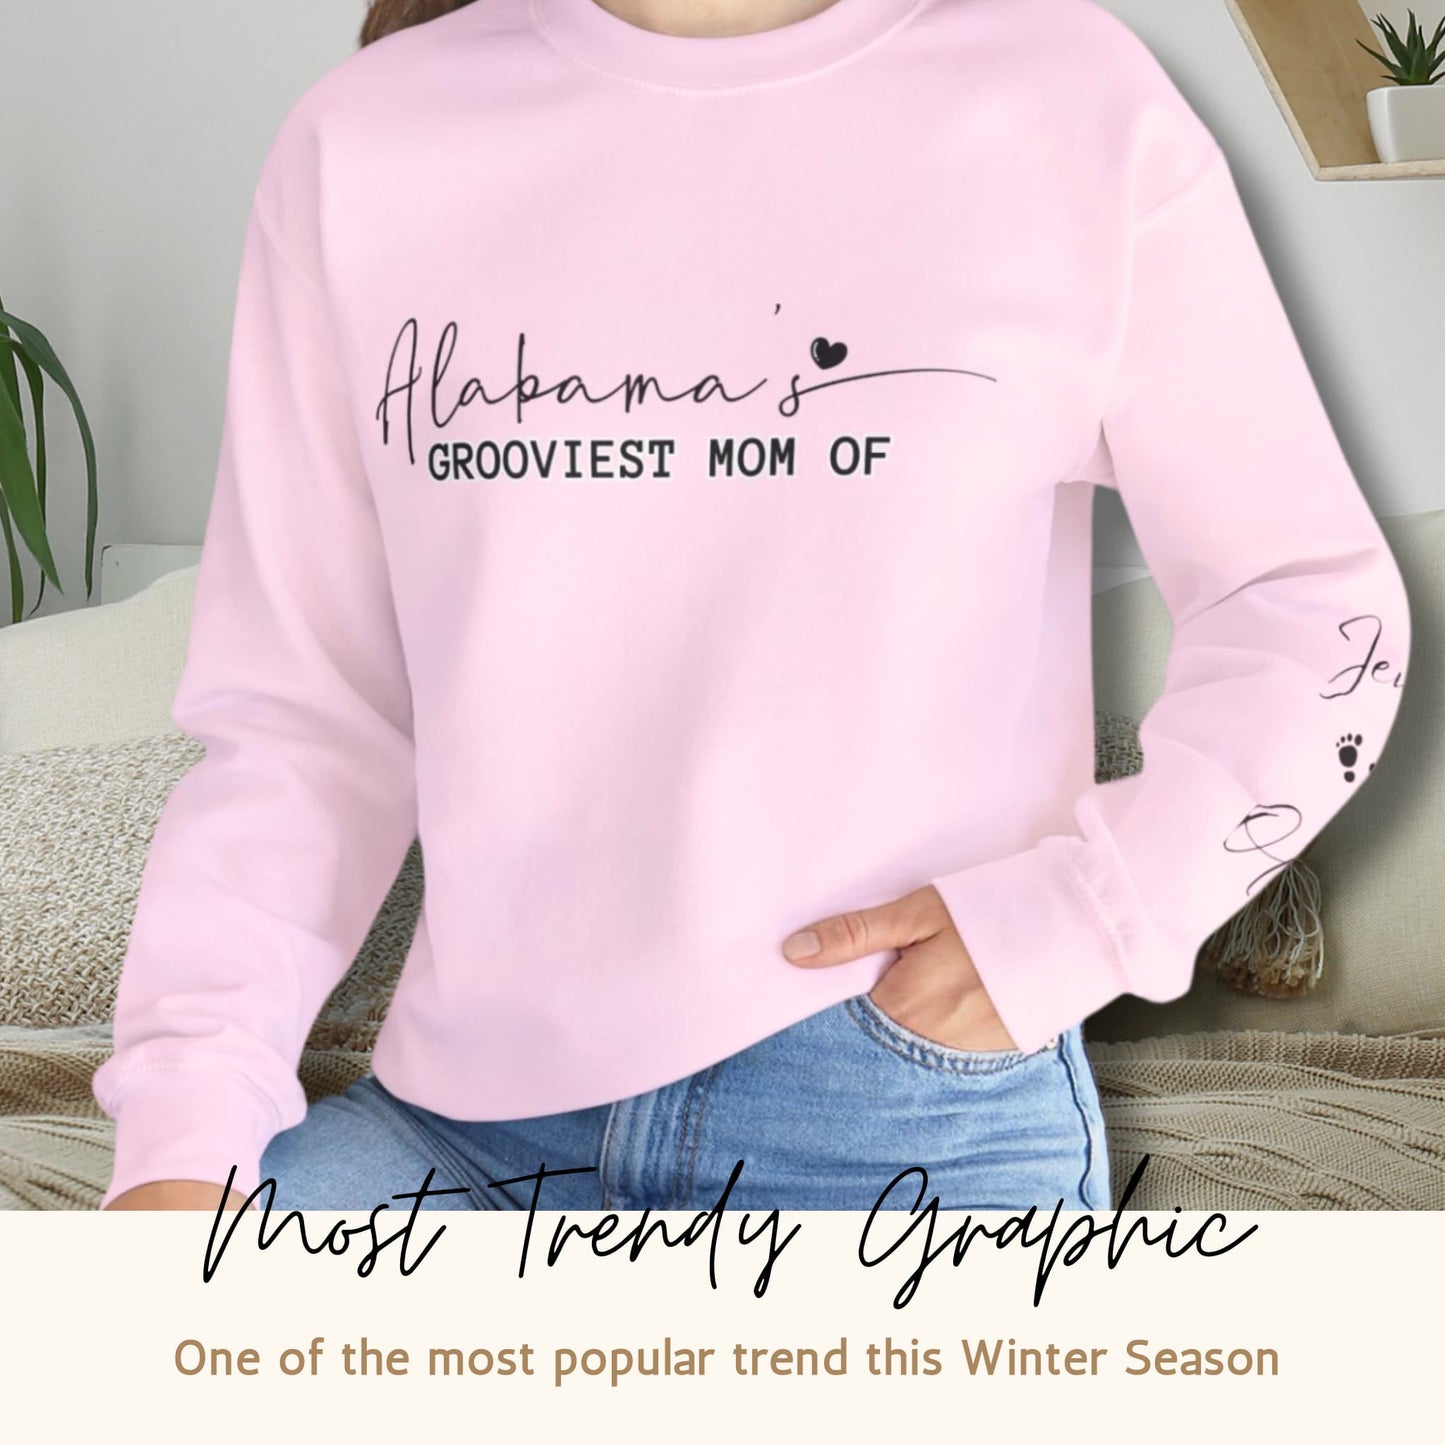 Lifestyle image of a woman wearing Alabama's Custom Mom Crewneck Sweatshirt with trendy graphic text, portraying a casual and stylish look.